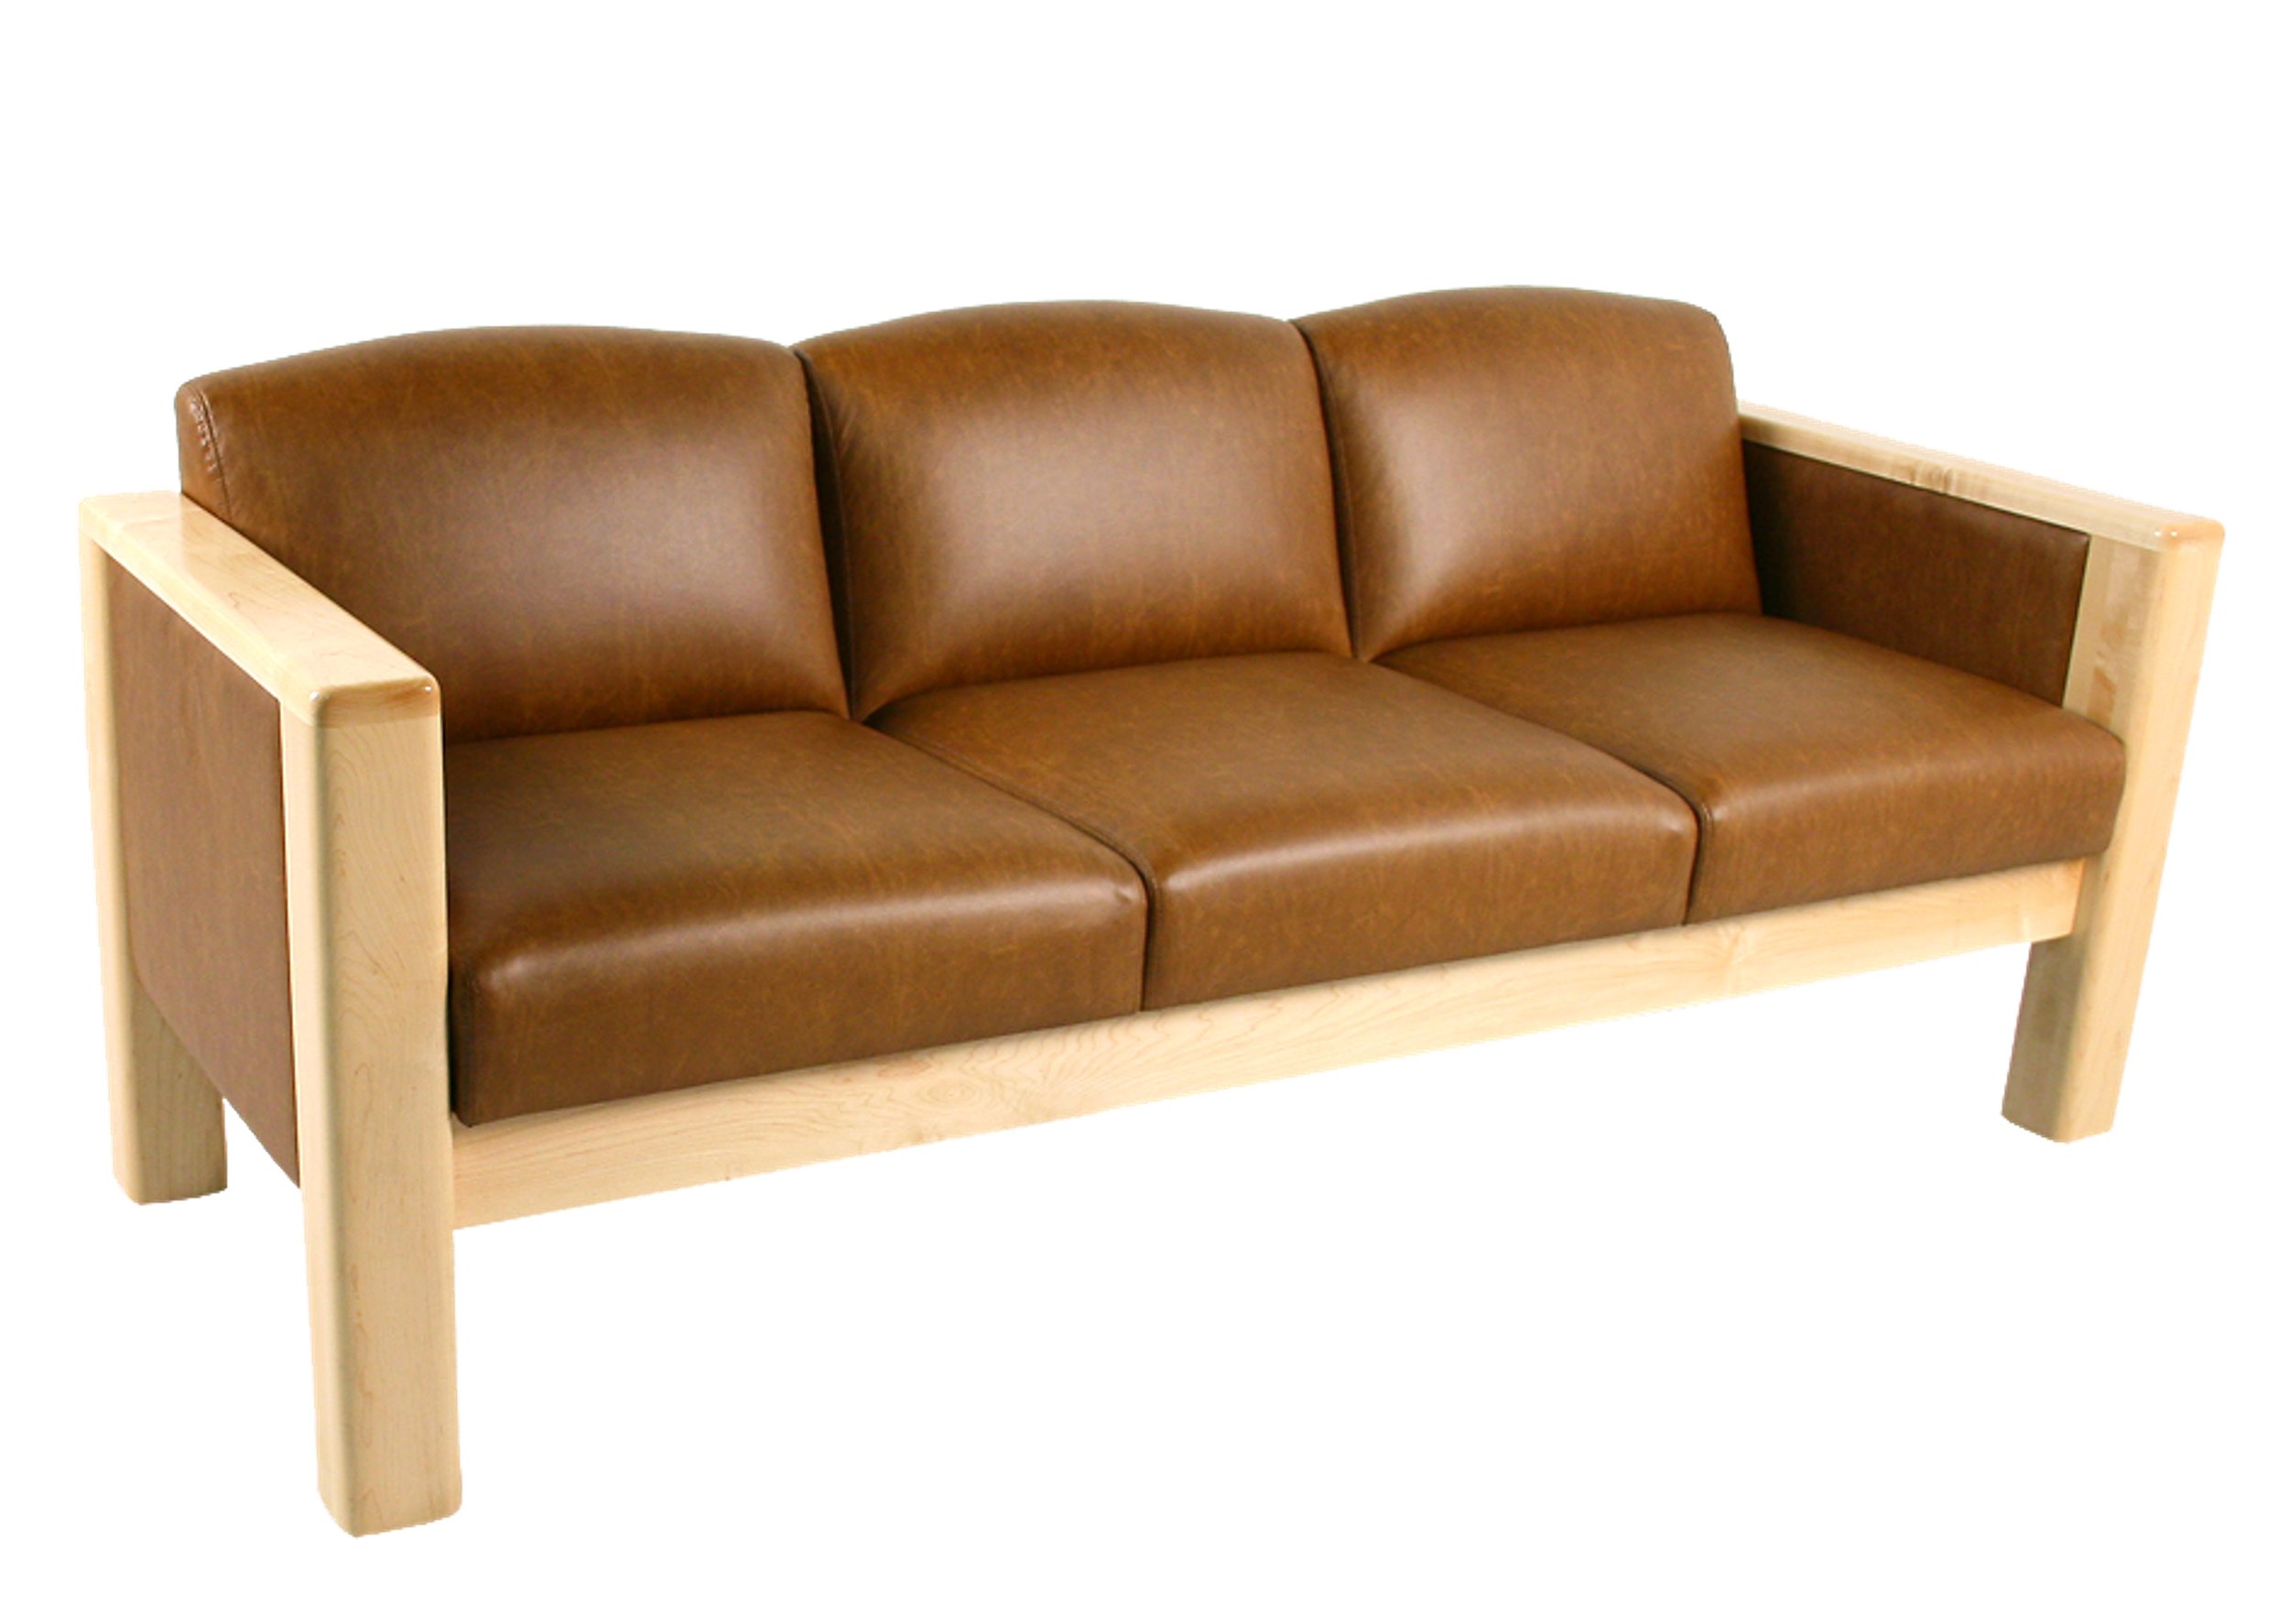 853-3 | COM-LEATHER | NATURAL-MAPLE